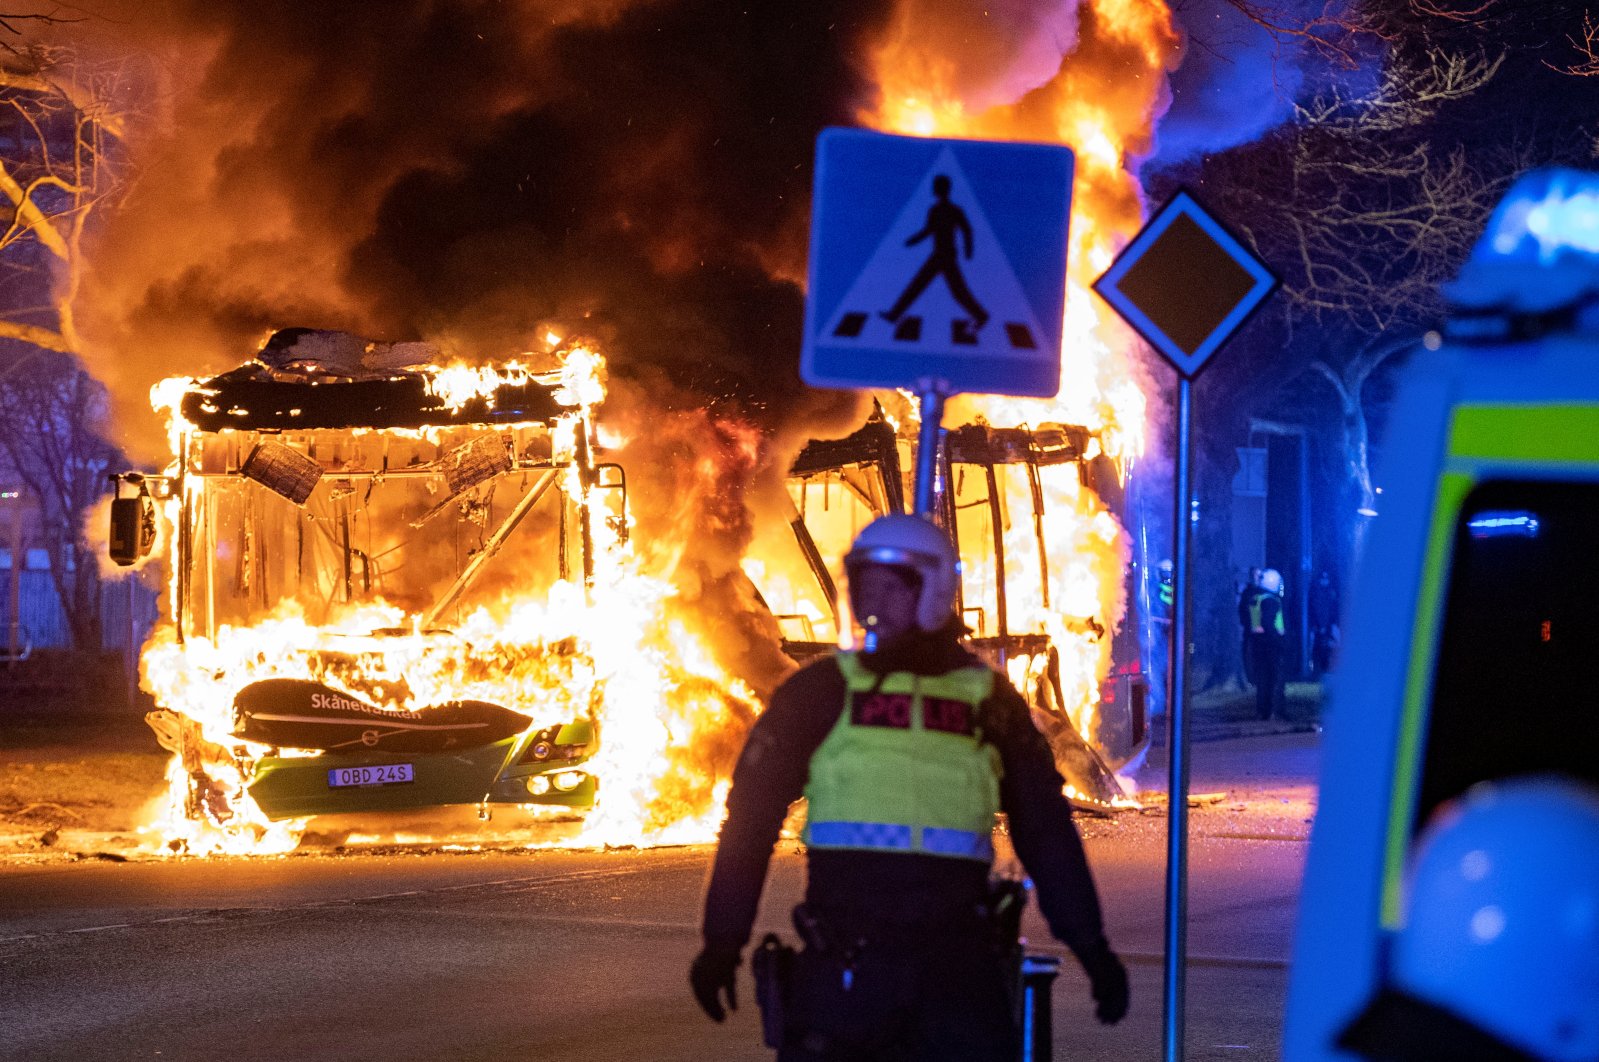 A police officer stands near a burning bus after a demonstration organized by Rasmus Paludan, leader of Danish far-right political party Hard Line turned violent, in Rosengard, Malmo, Sweden April 16, 2022. (Reuters File Photo)